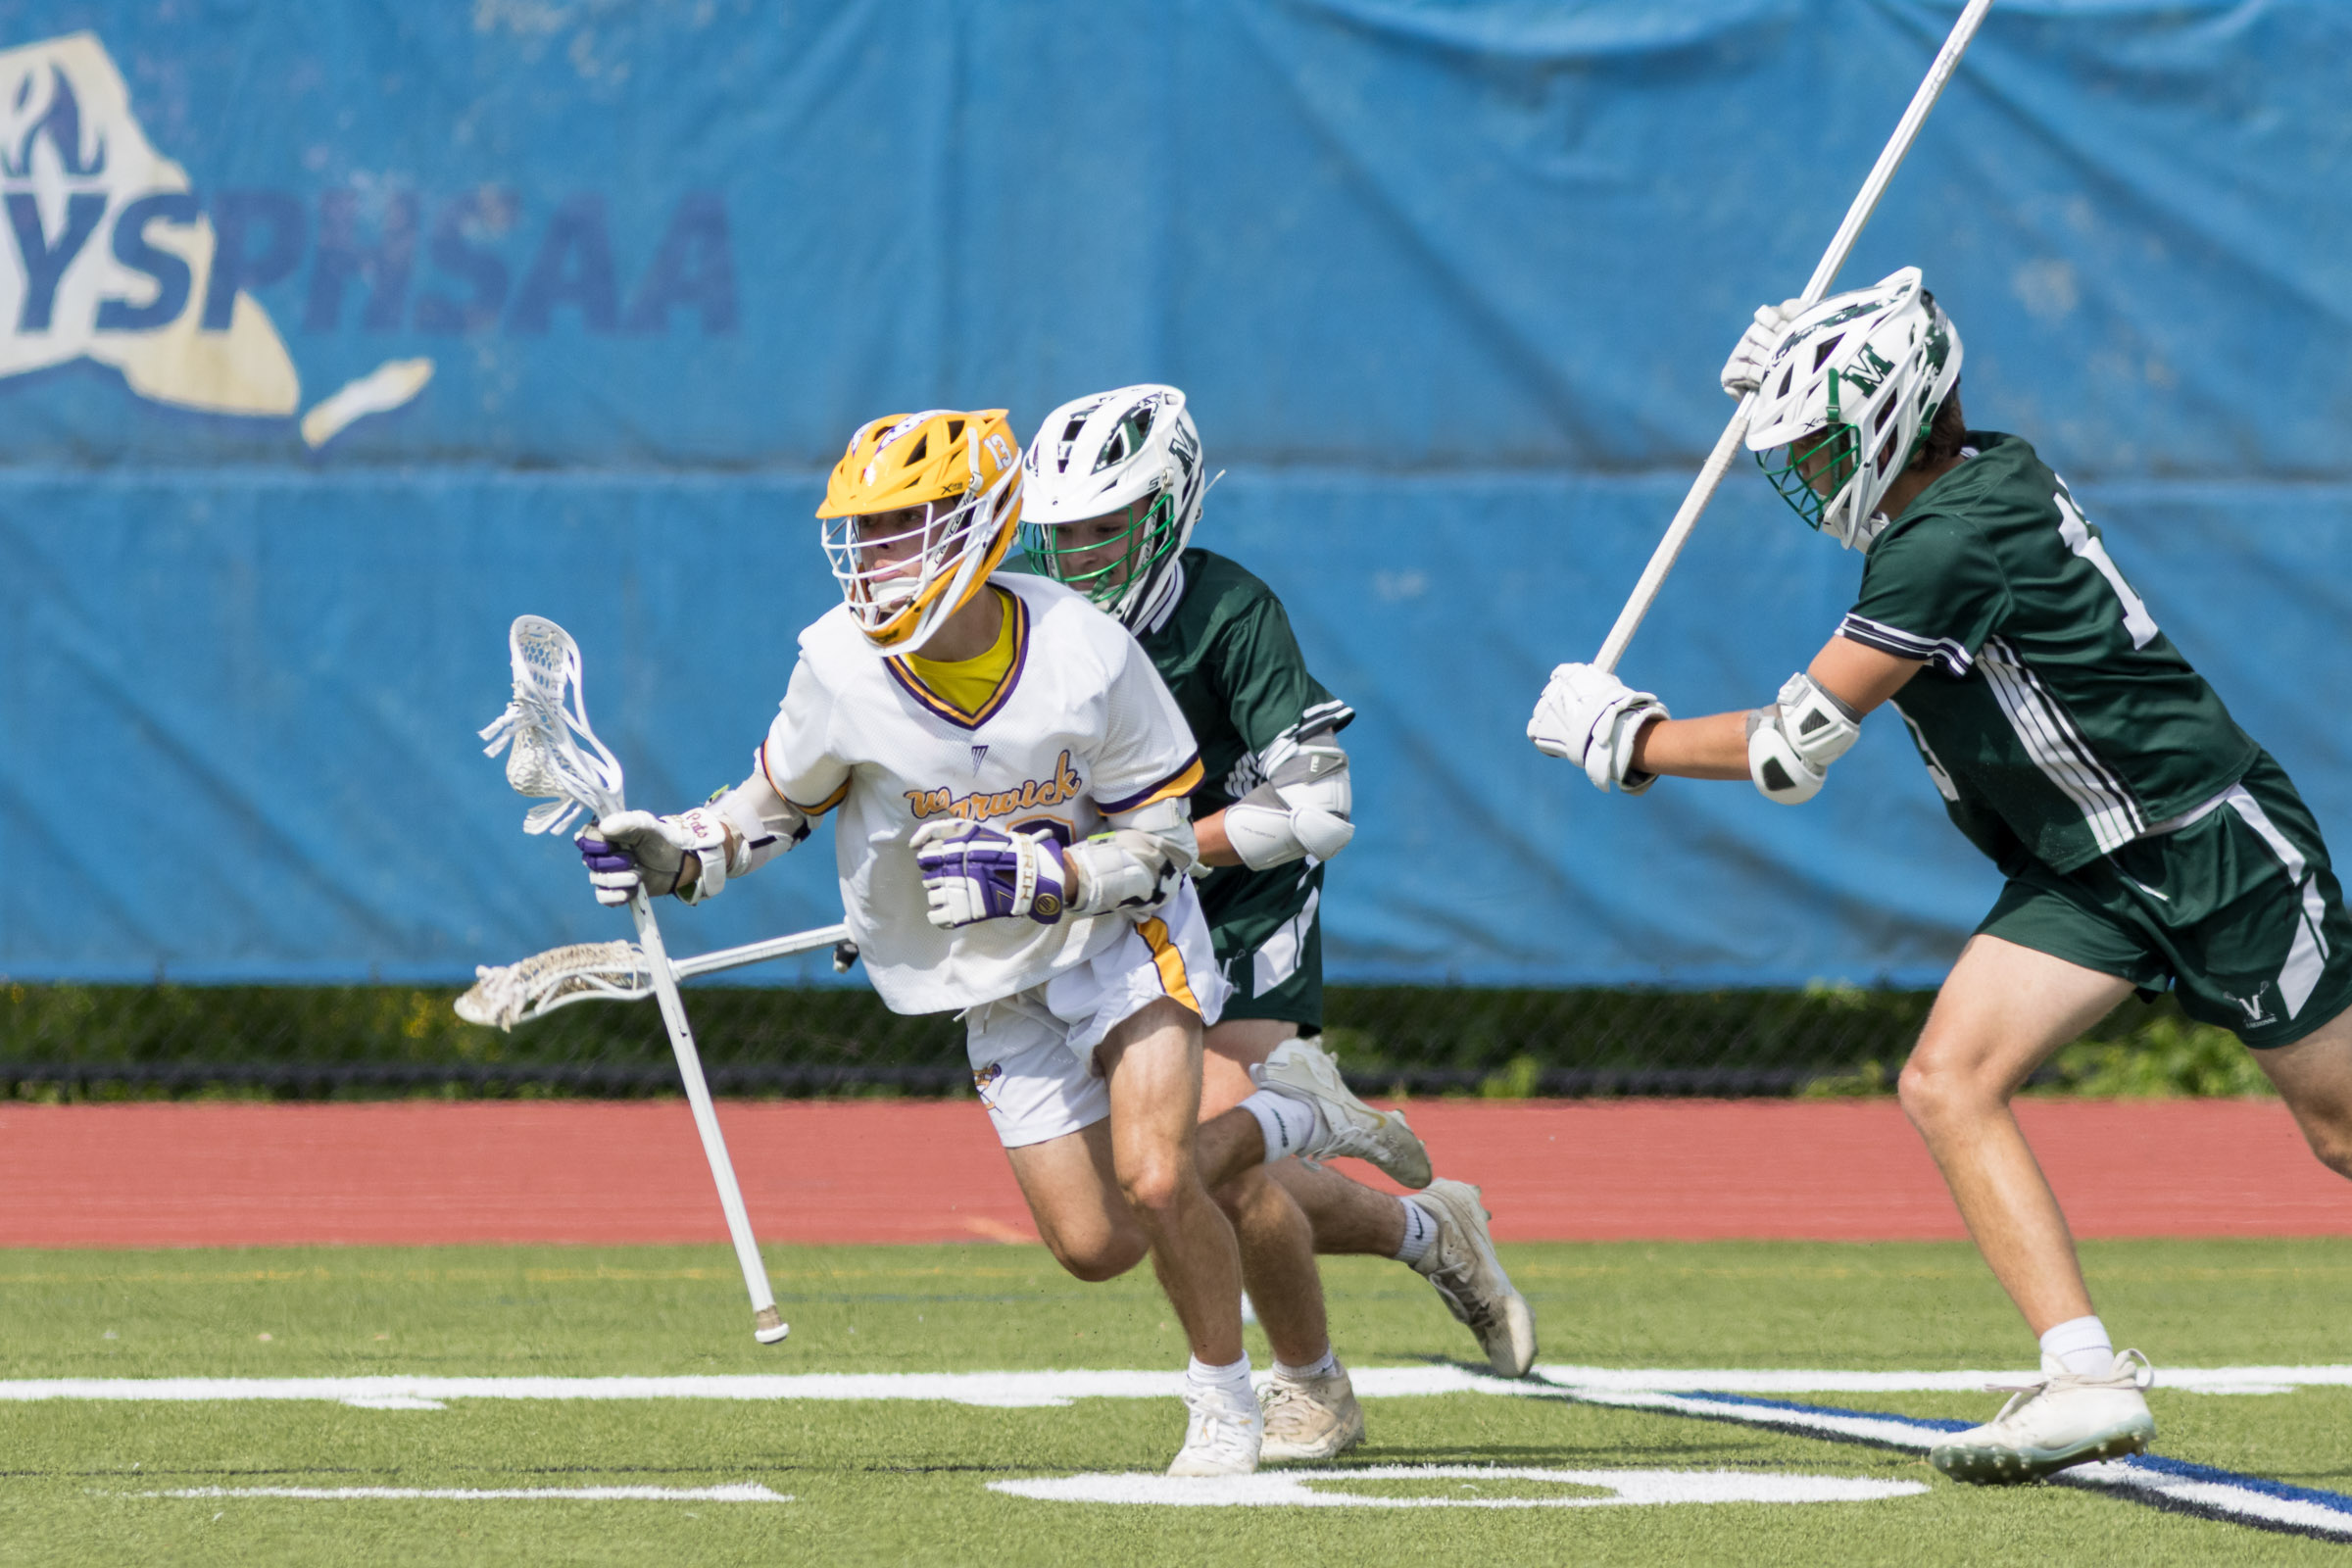 A Warwick Valley varsity boys lacrosse player carries the ball past two Minisink Valley players during the Section 9 Class B championship game.